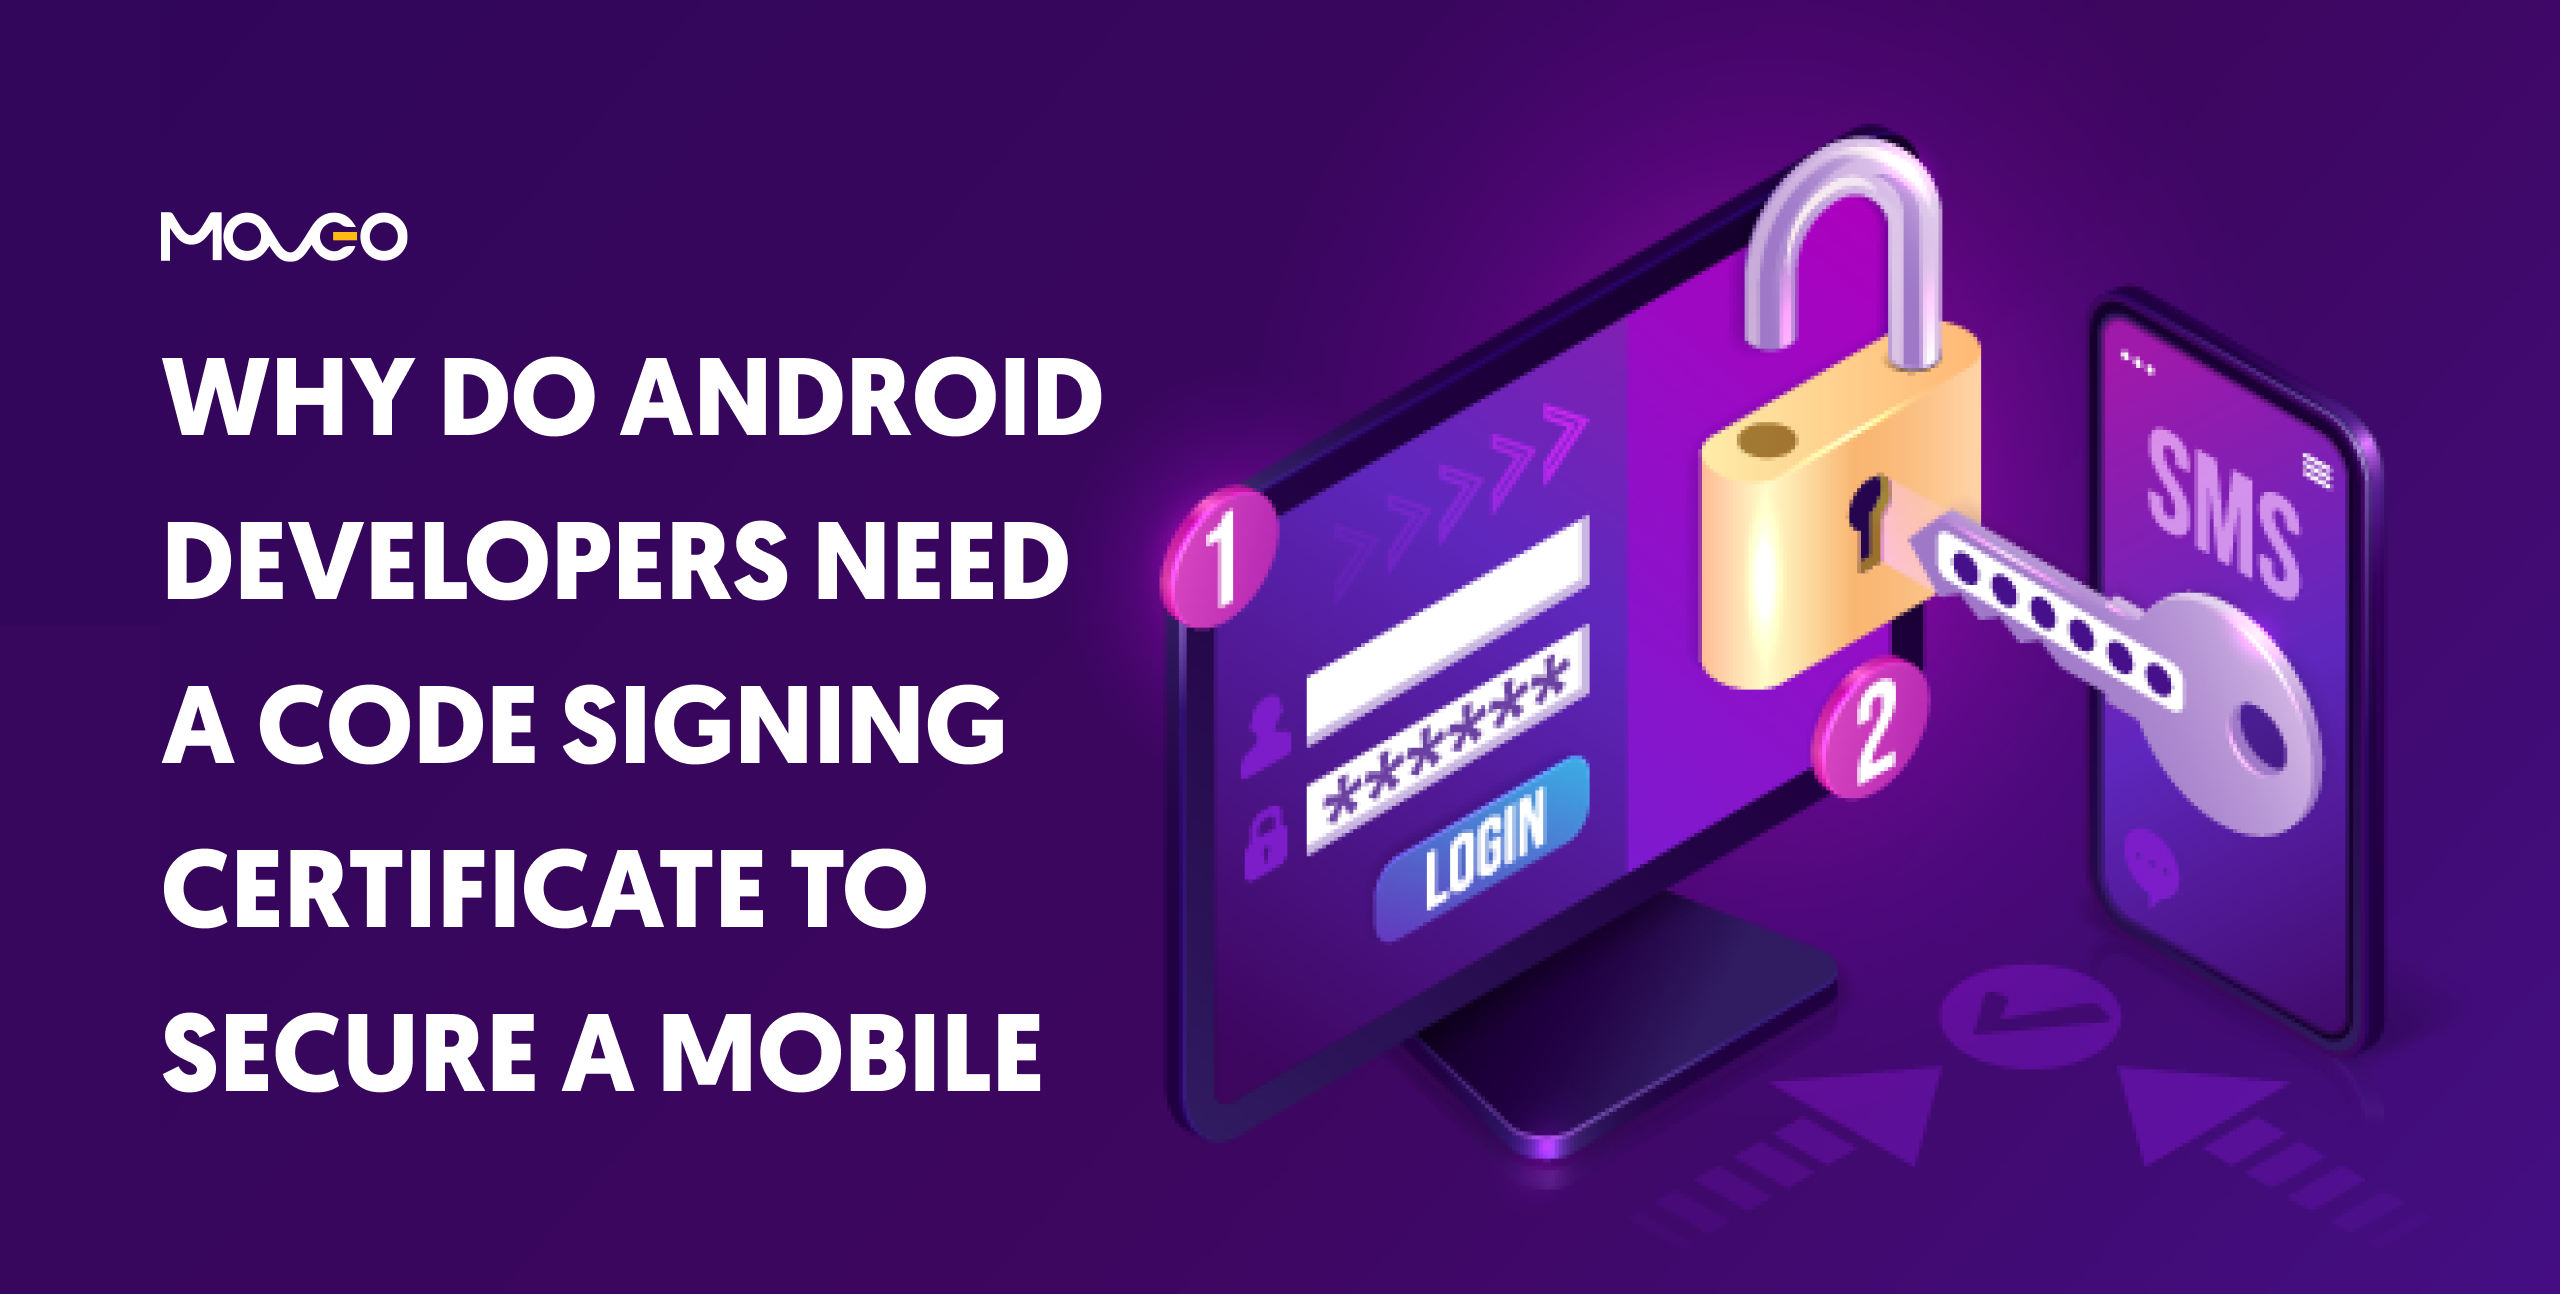 why do android developers need a code signing certificate to secure a mobile